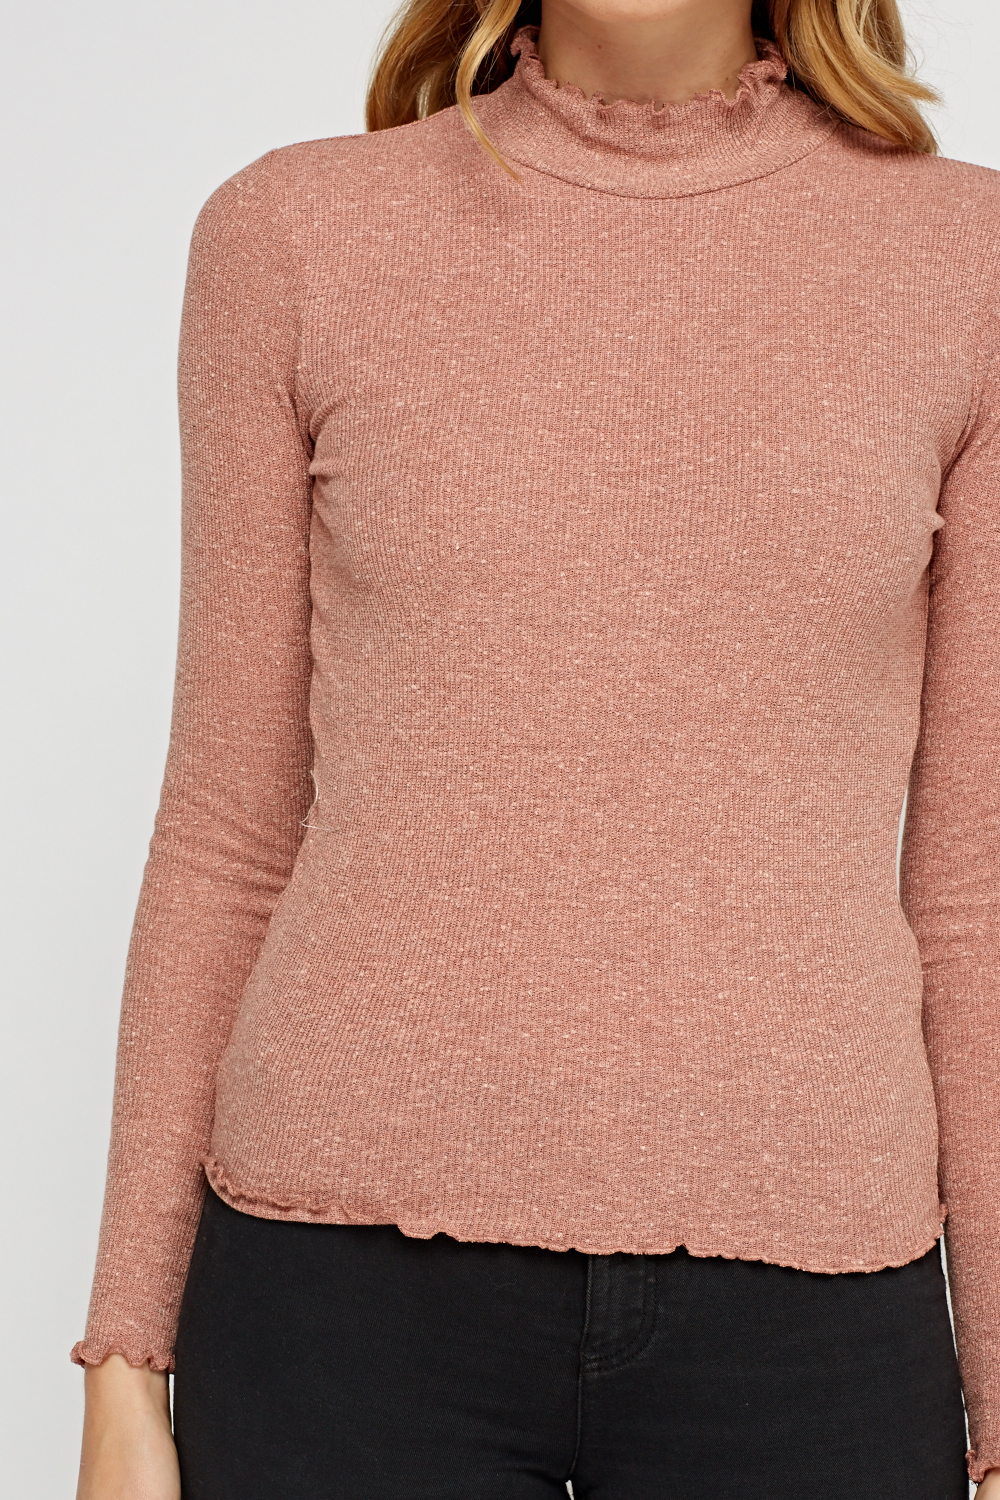 Frilled Dusty Pink Knit Top Just 7